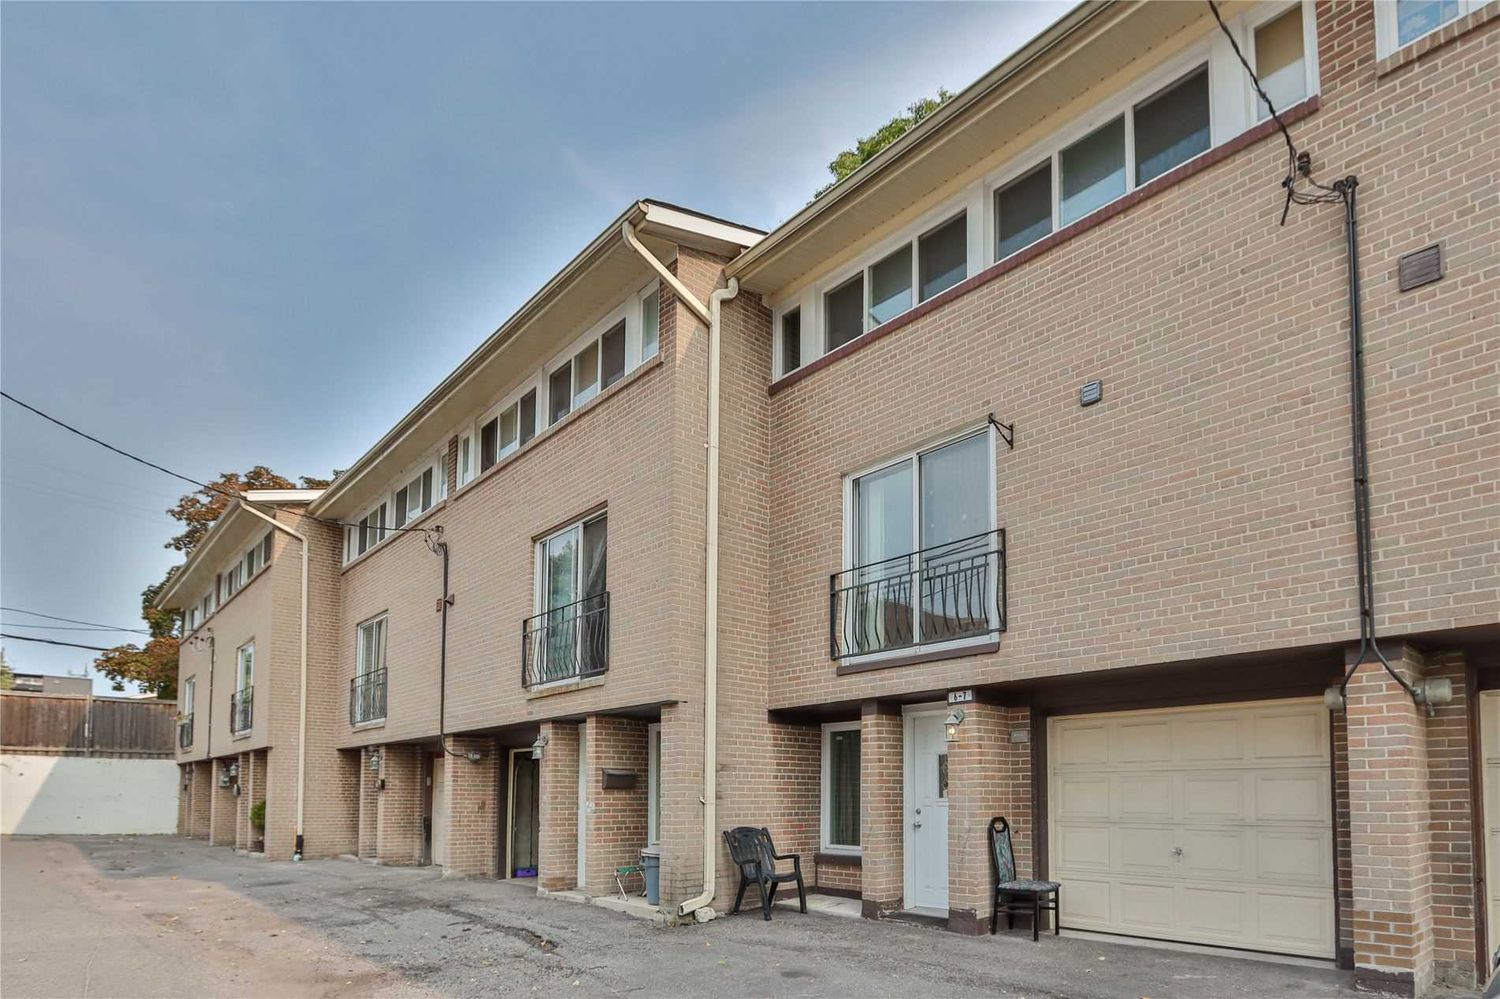 2-28 Streamdale Court. 17 Brookwell Drive Townhouses is located in  North York, Toronto - image #1 of 2